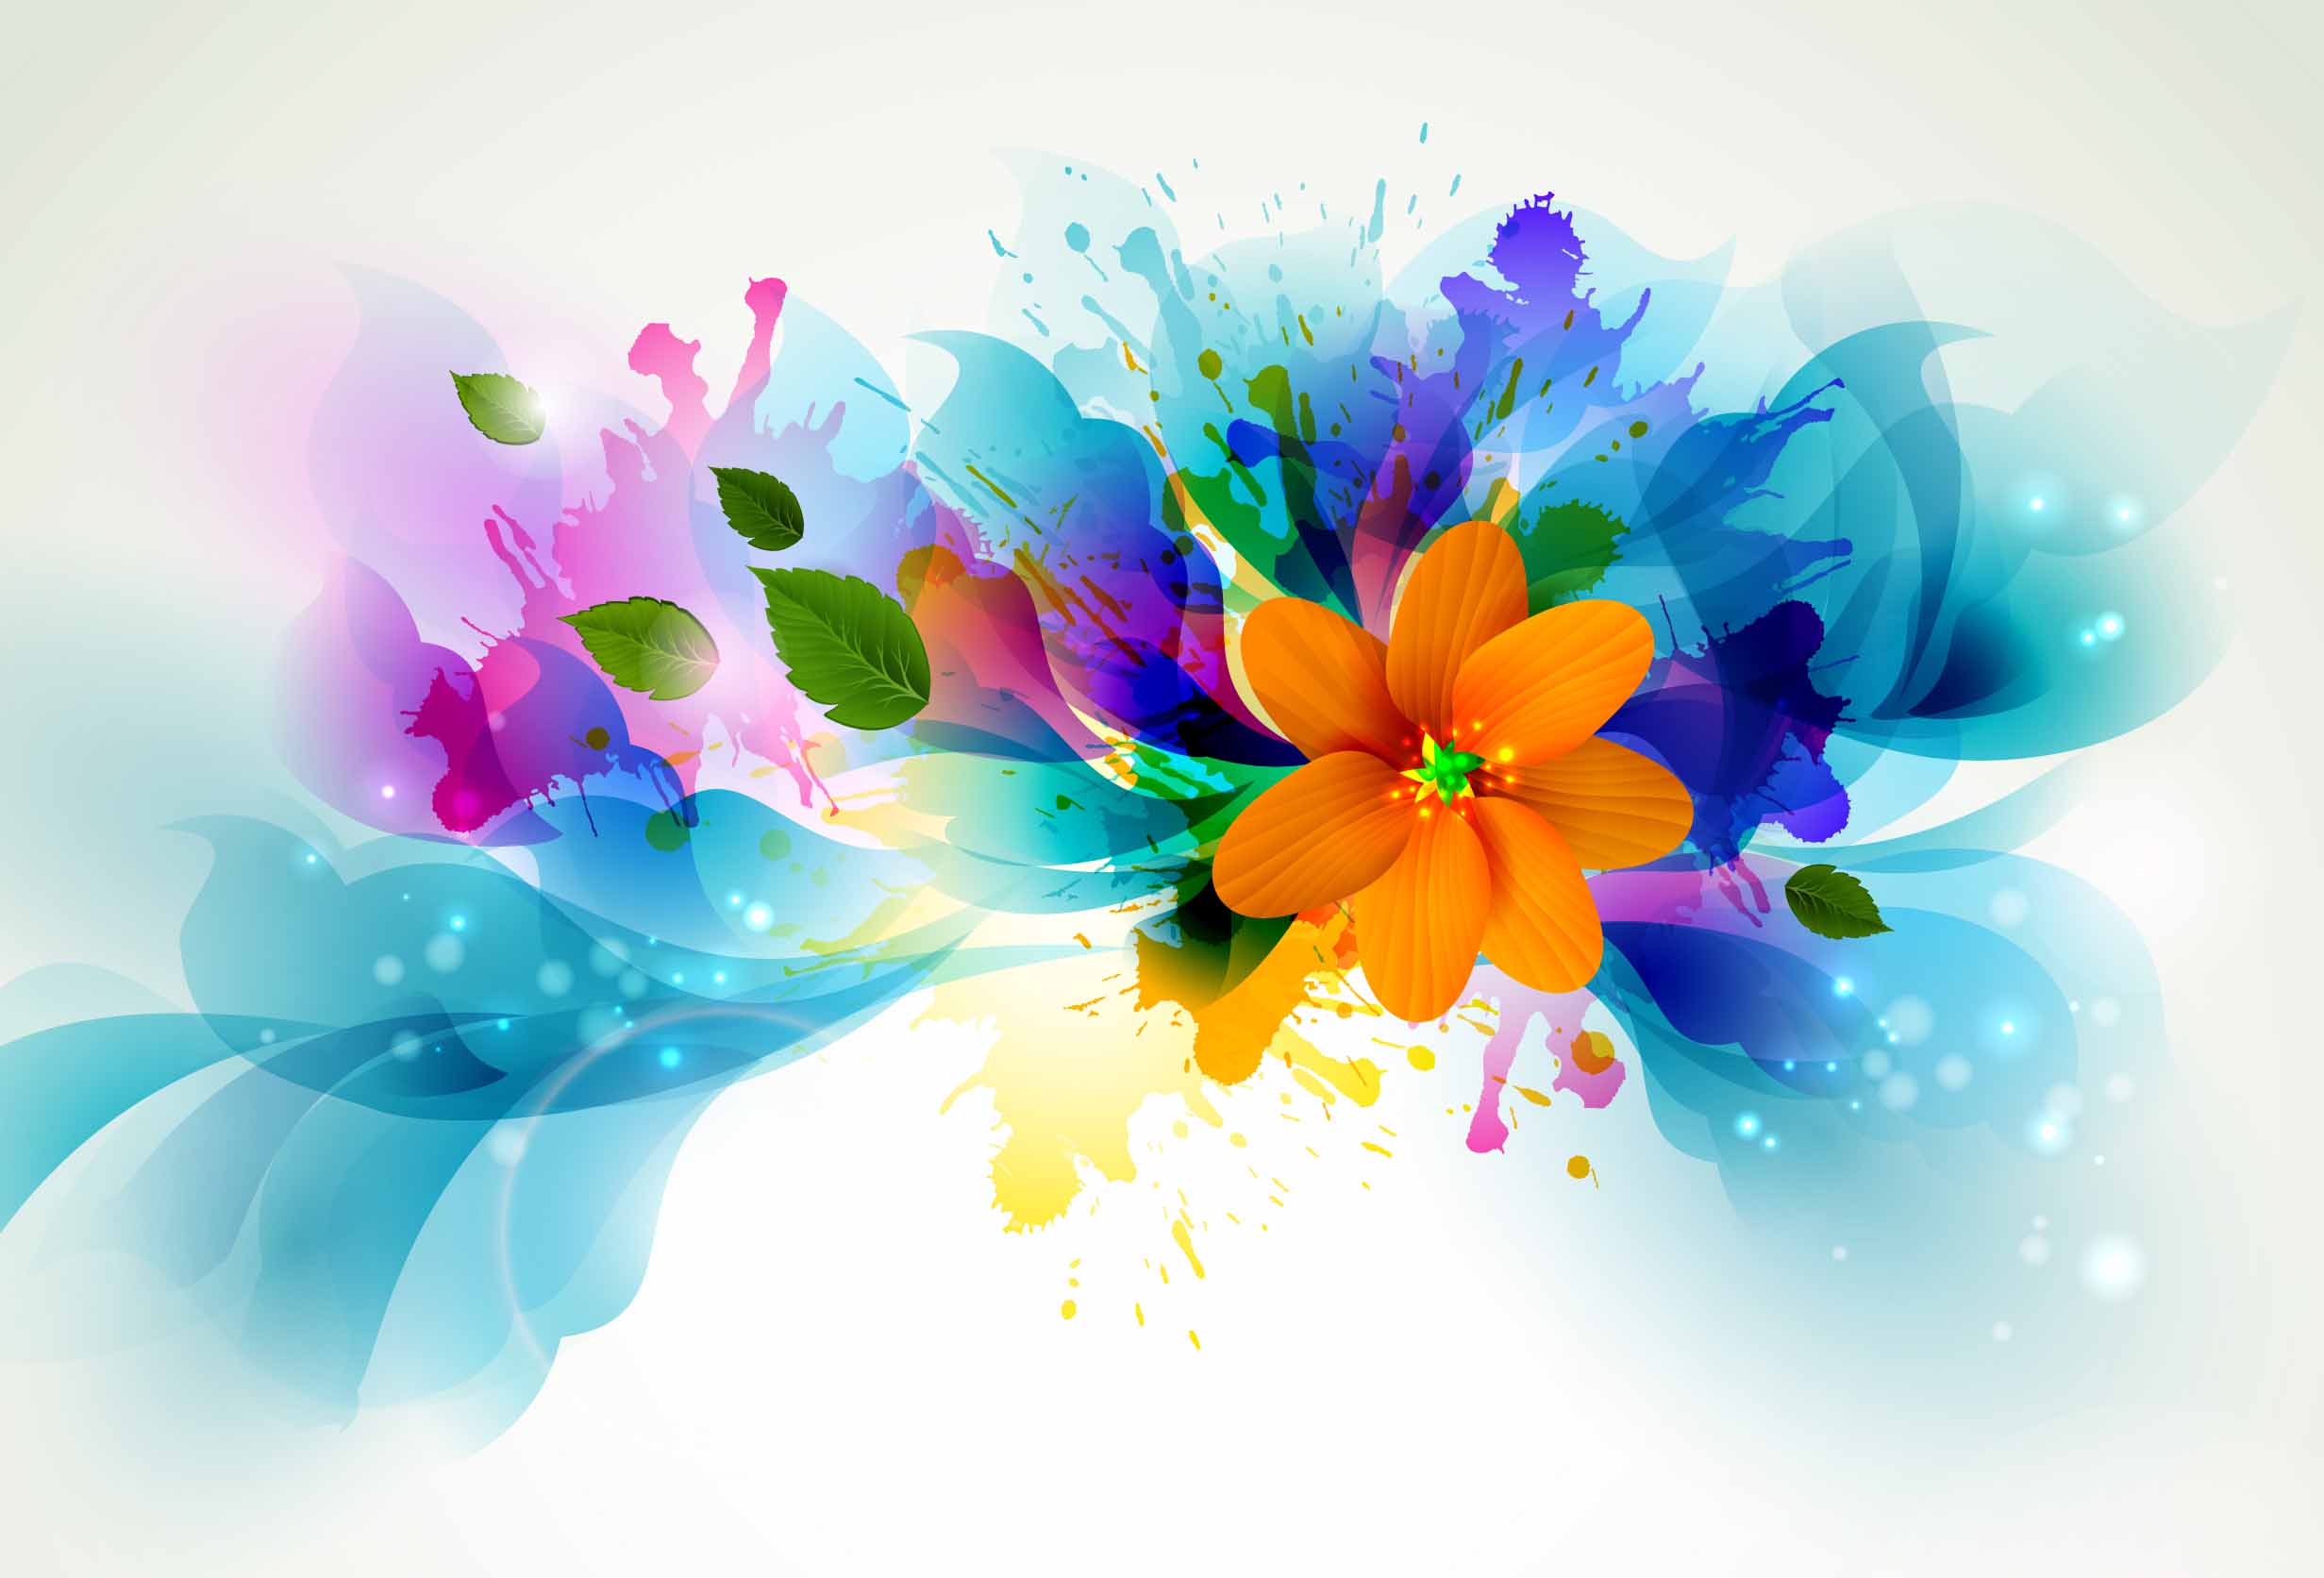 Beautiful Flower Wallpaper Image For